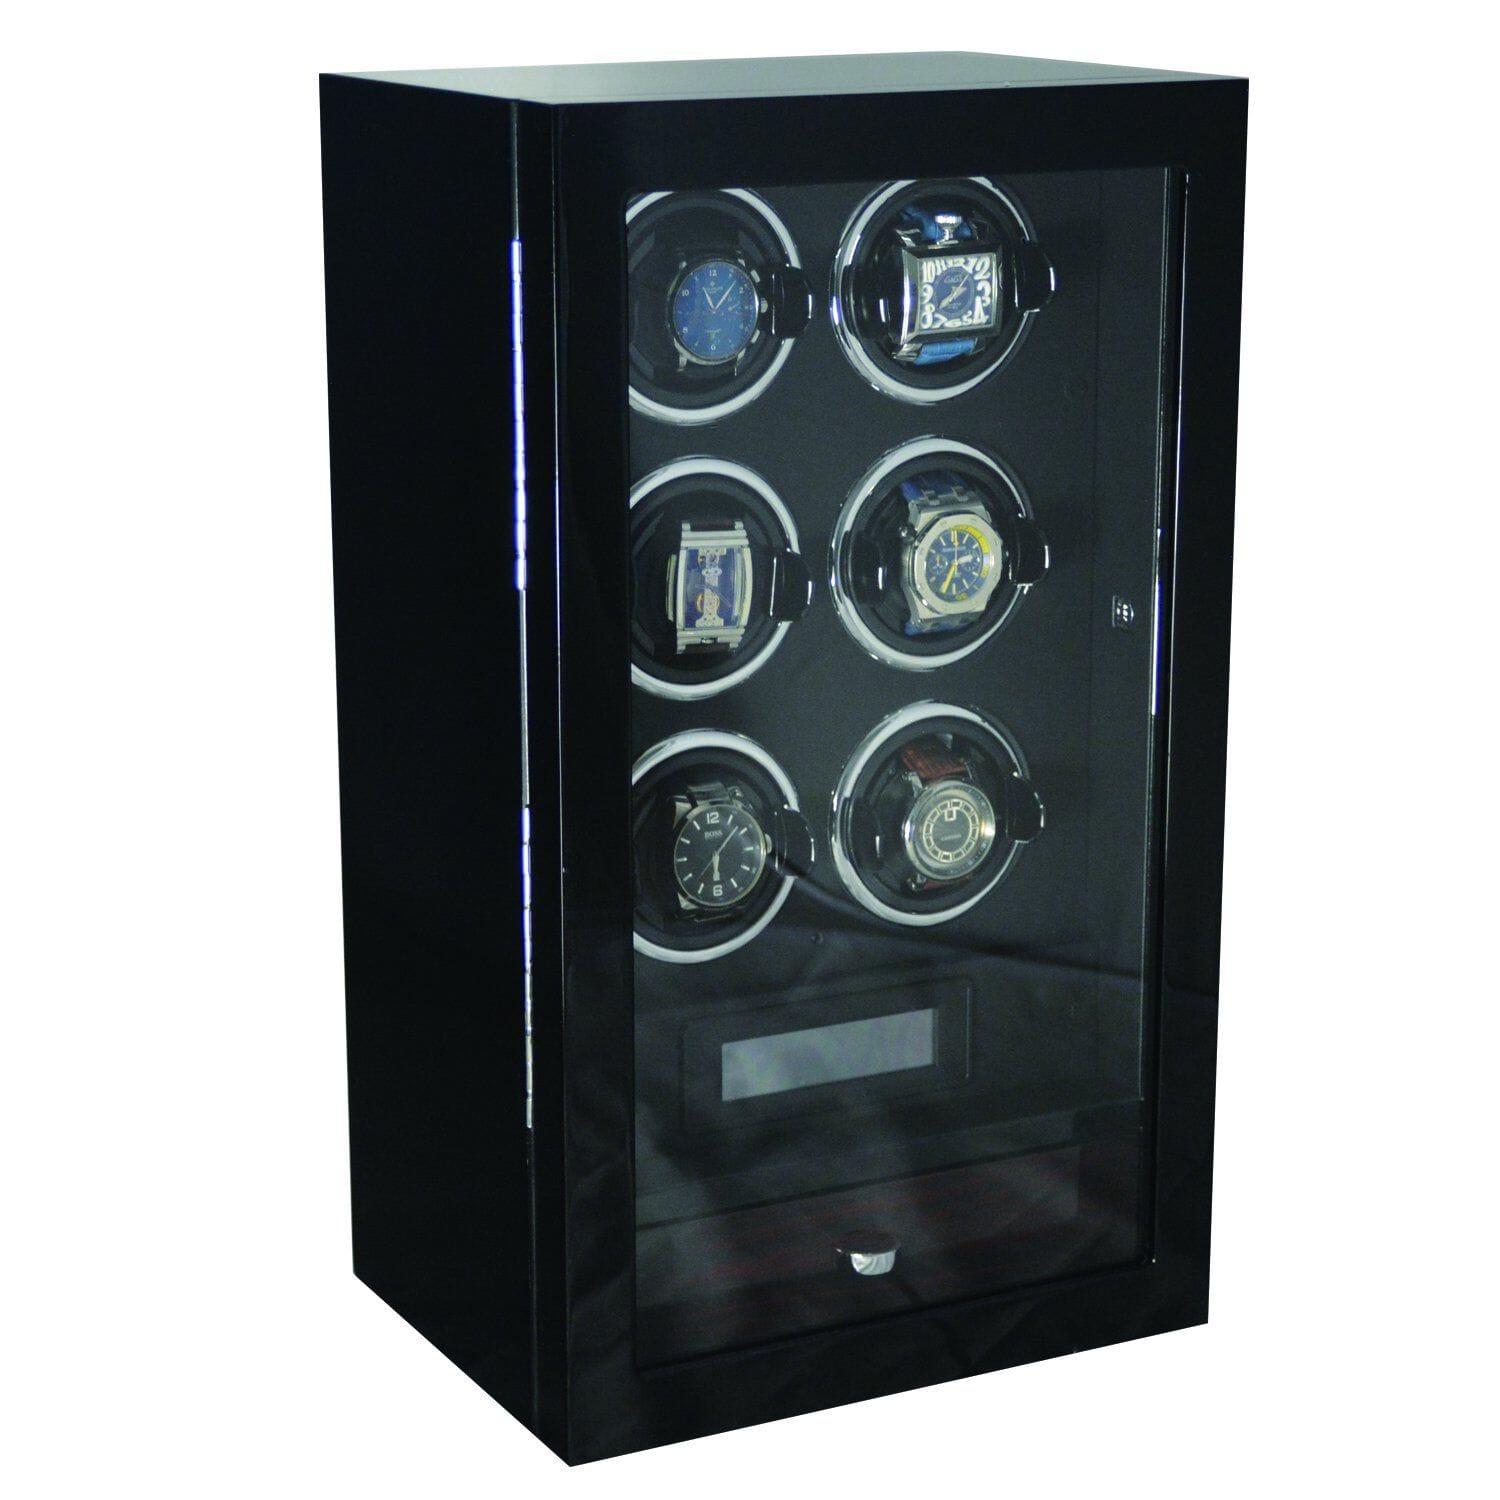 Yarra Watch Winder for 6 Watches + Drawer with Fingerprint Lock Watch Winder Boxes Clinks 